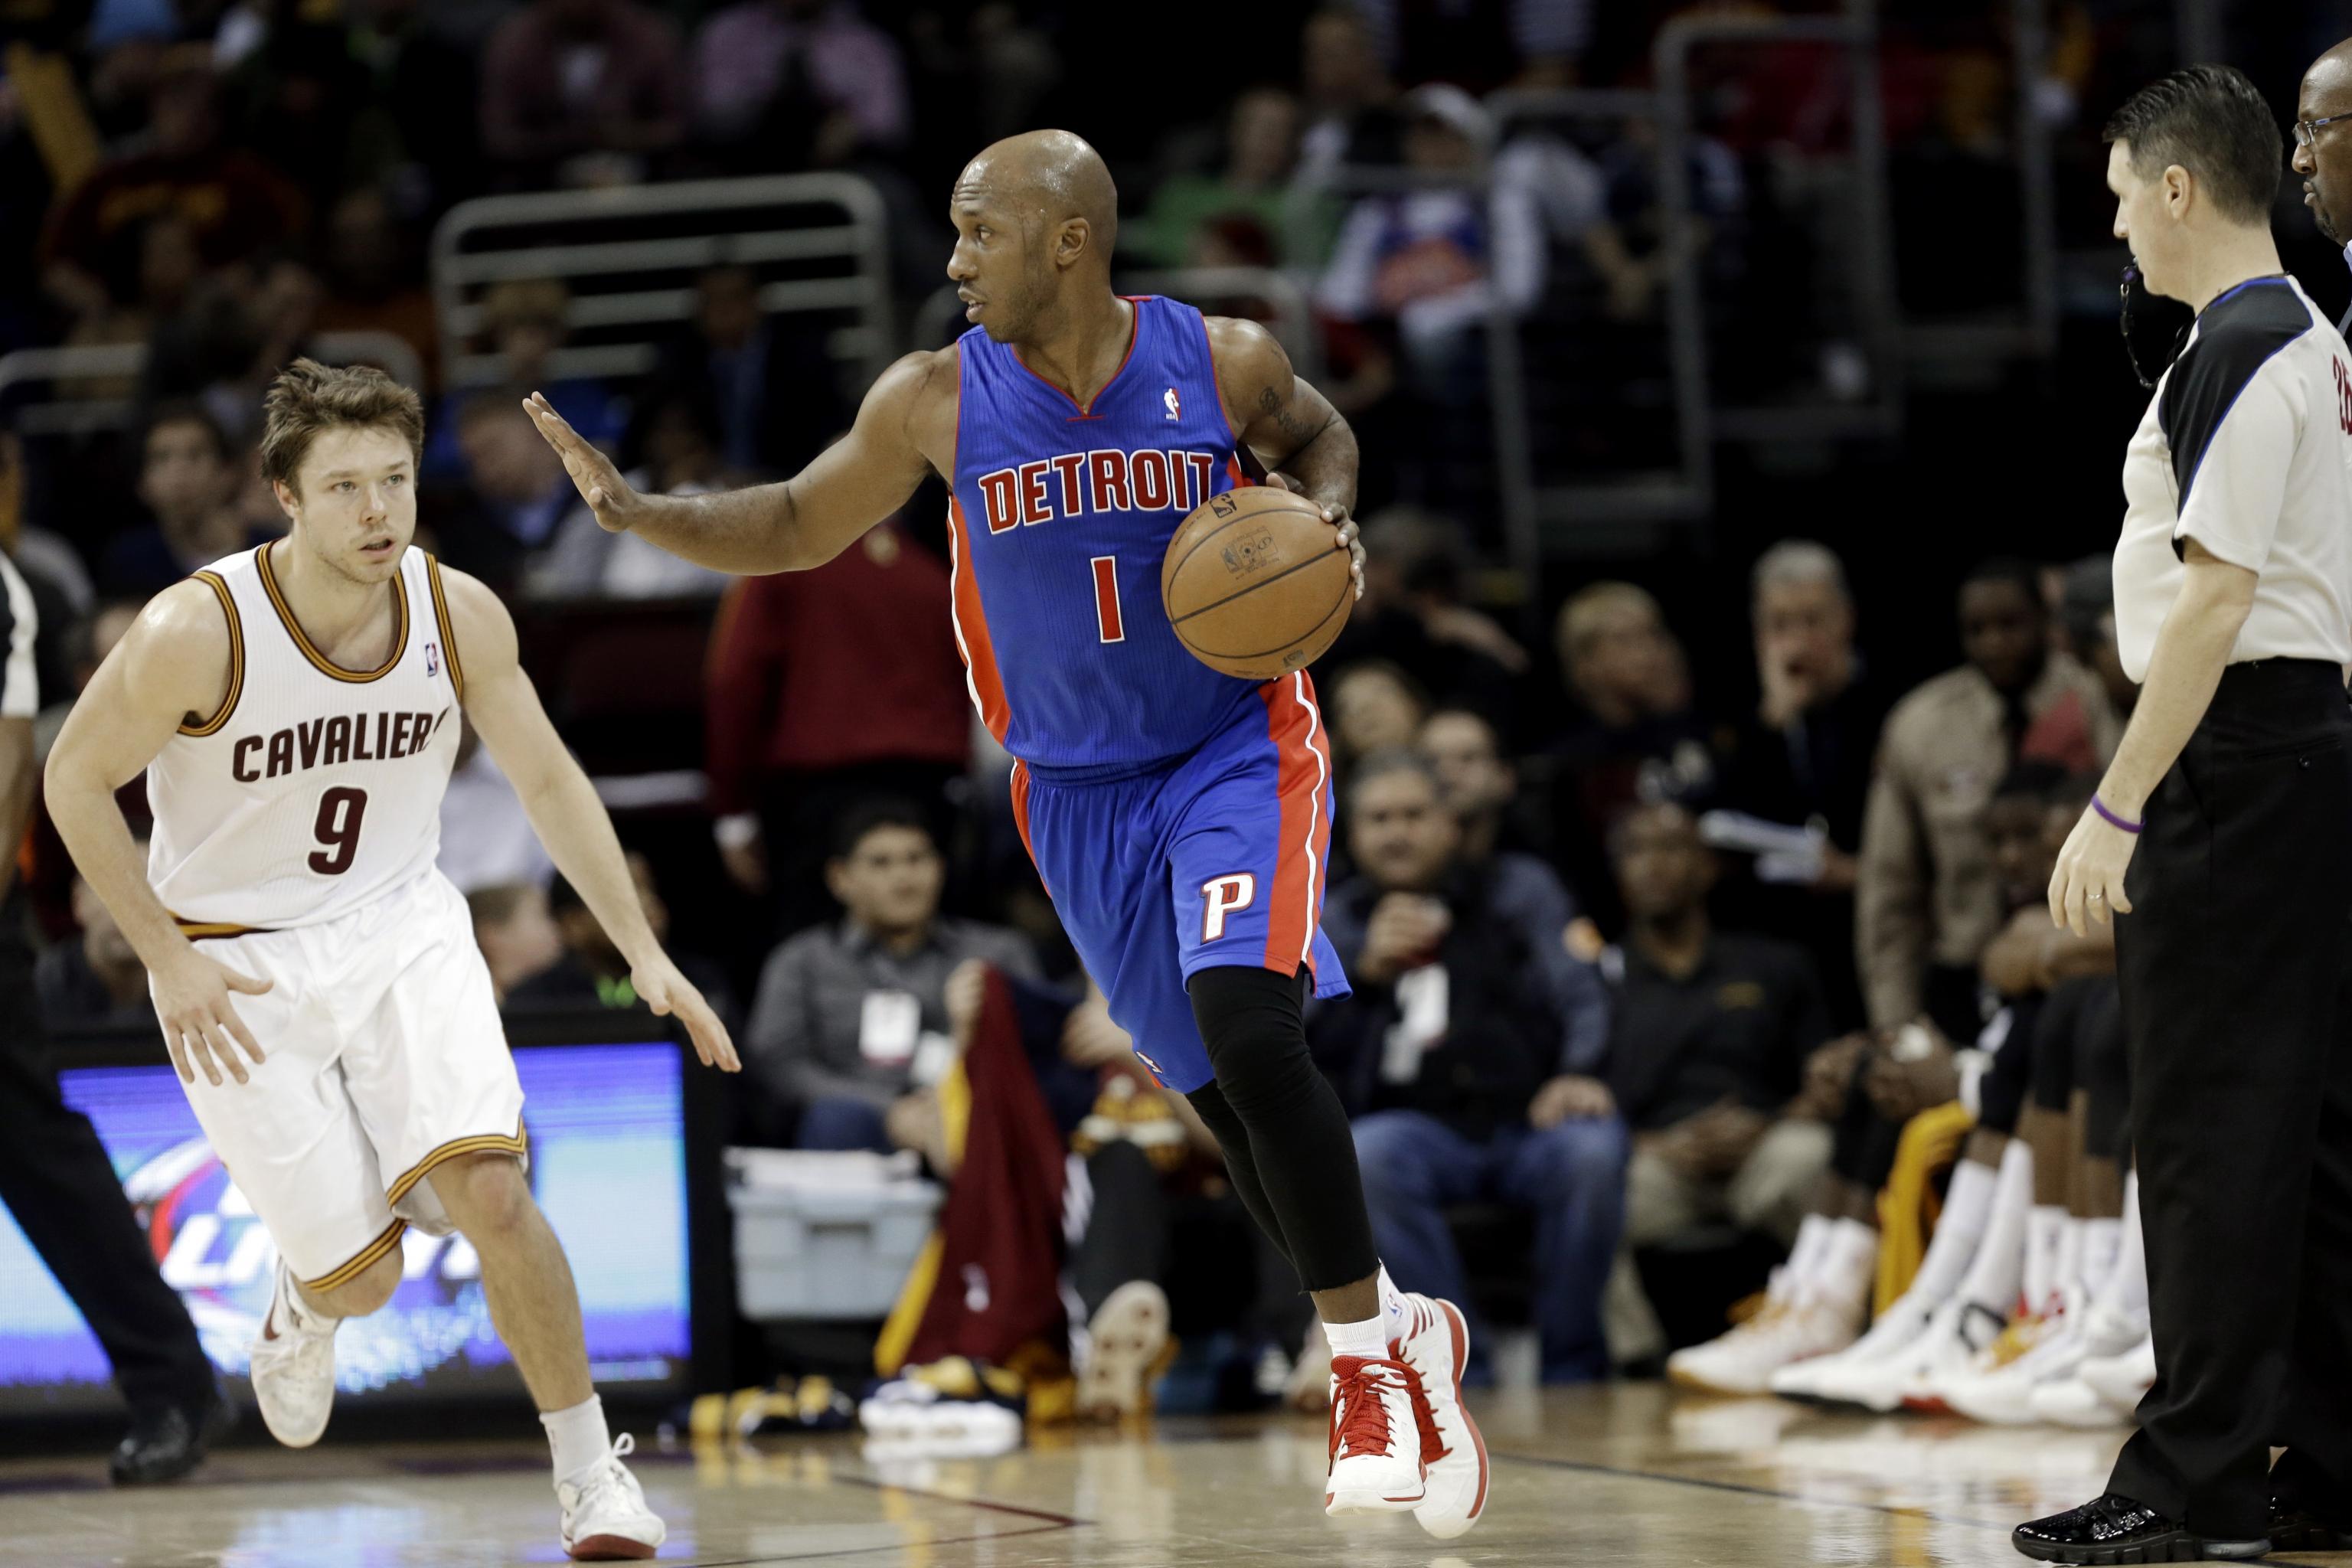 Chauncey Billups has number retired by the Detroit Pistons - The